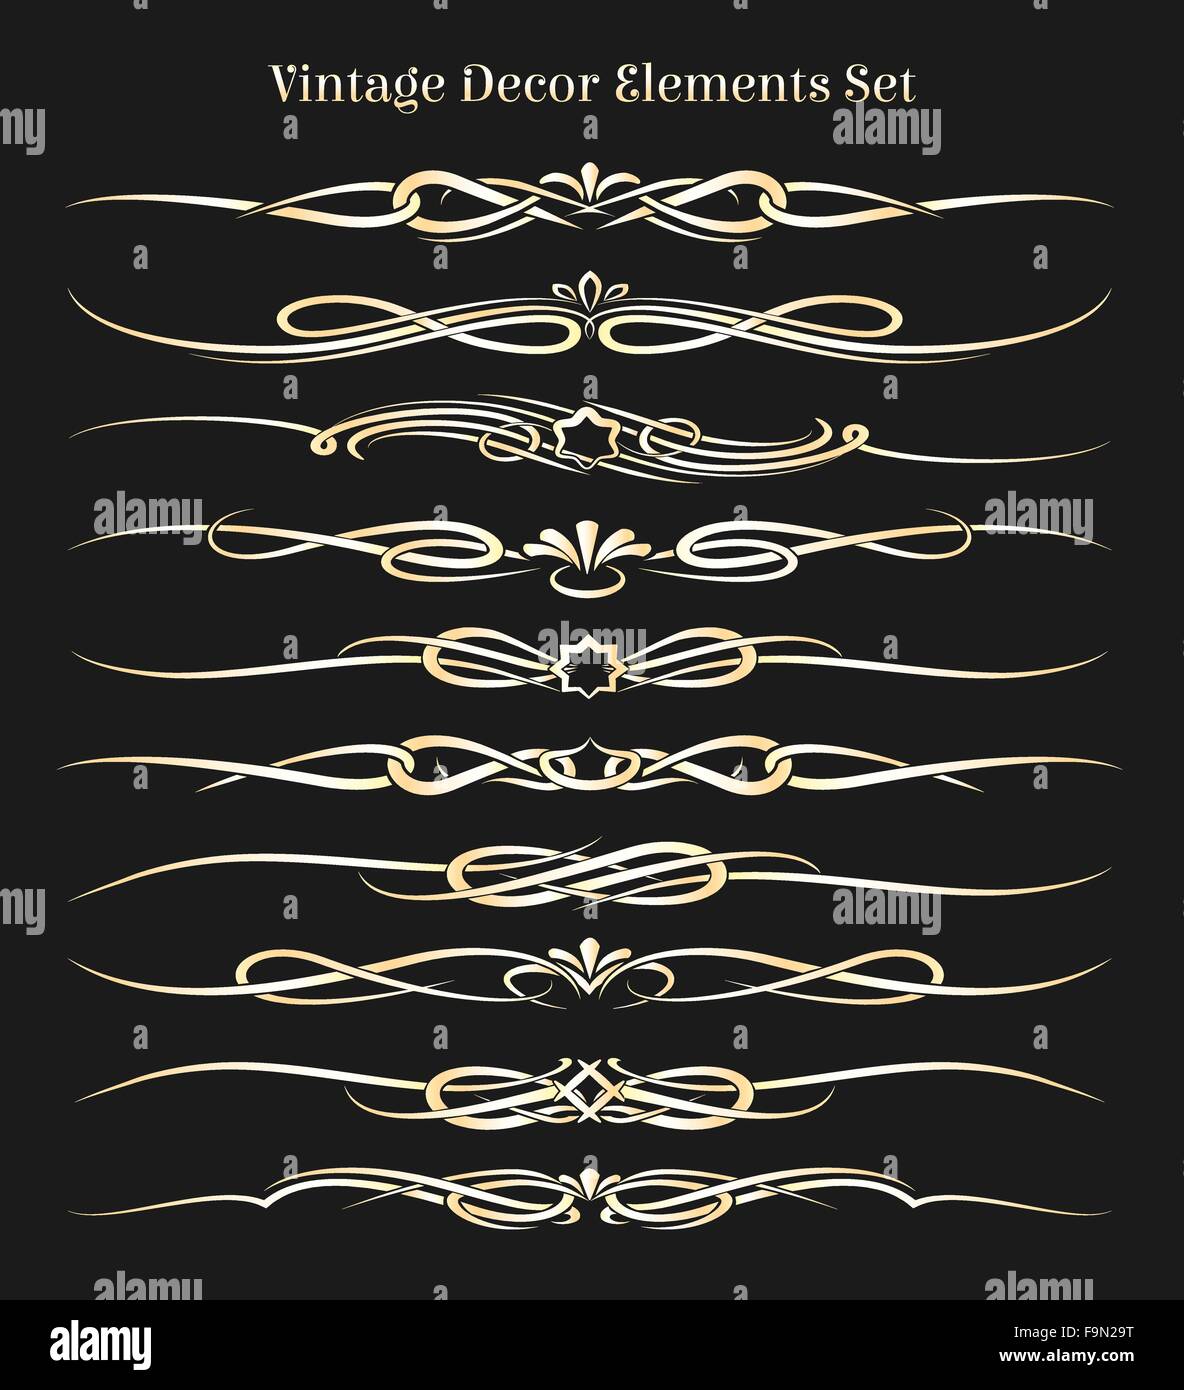 Vintage Decor Elements set. Golden headers and dividers isolated on black. Stock Vector